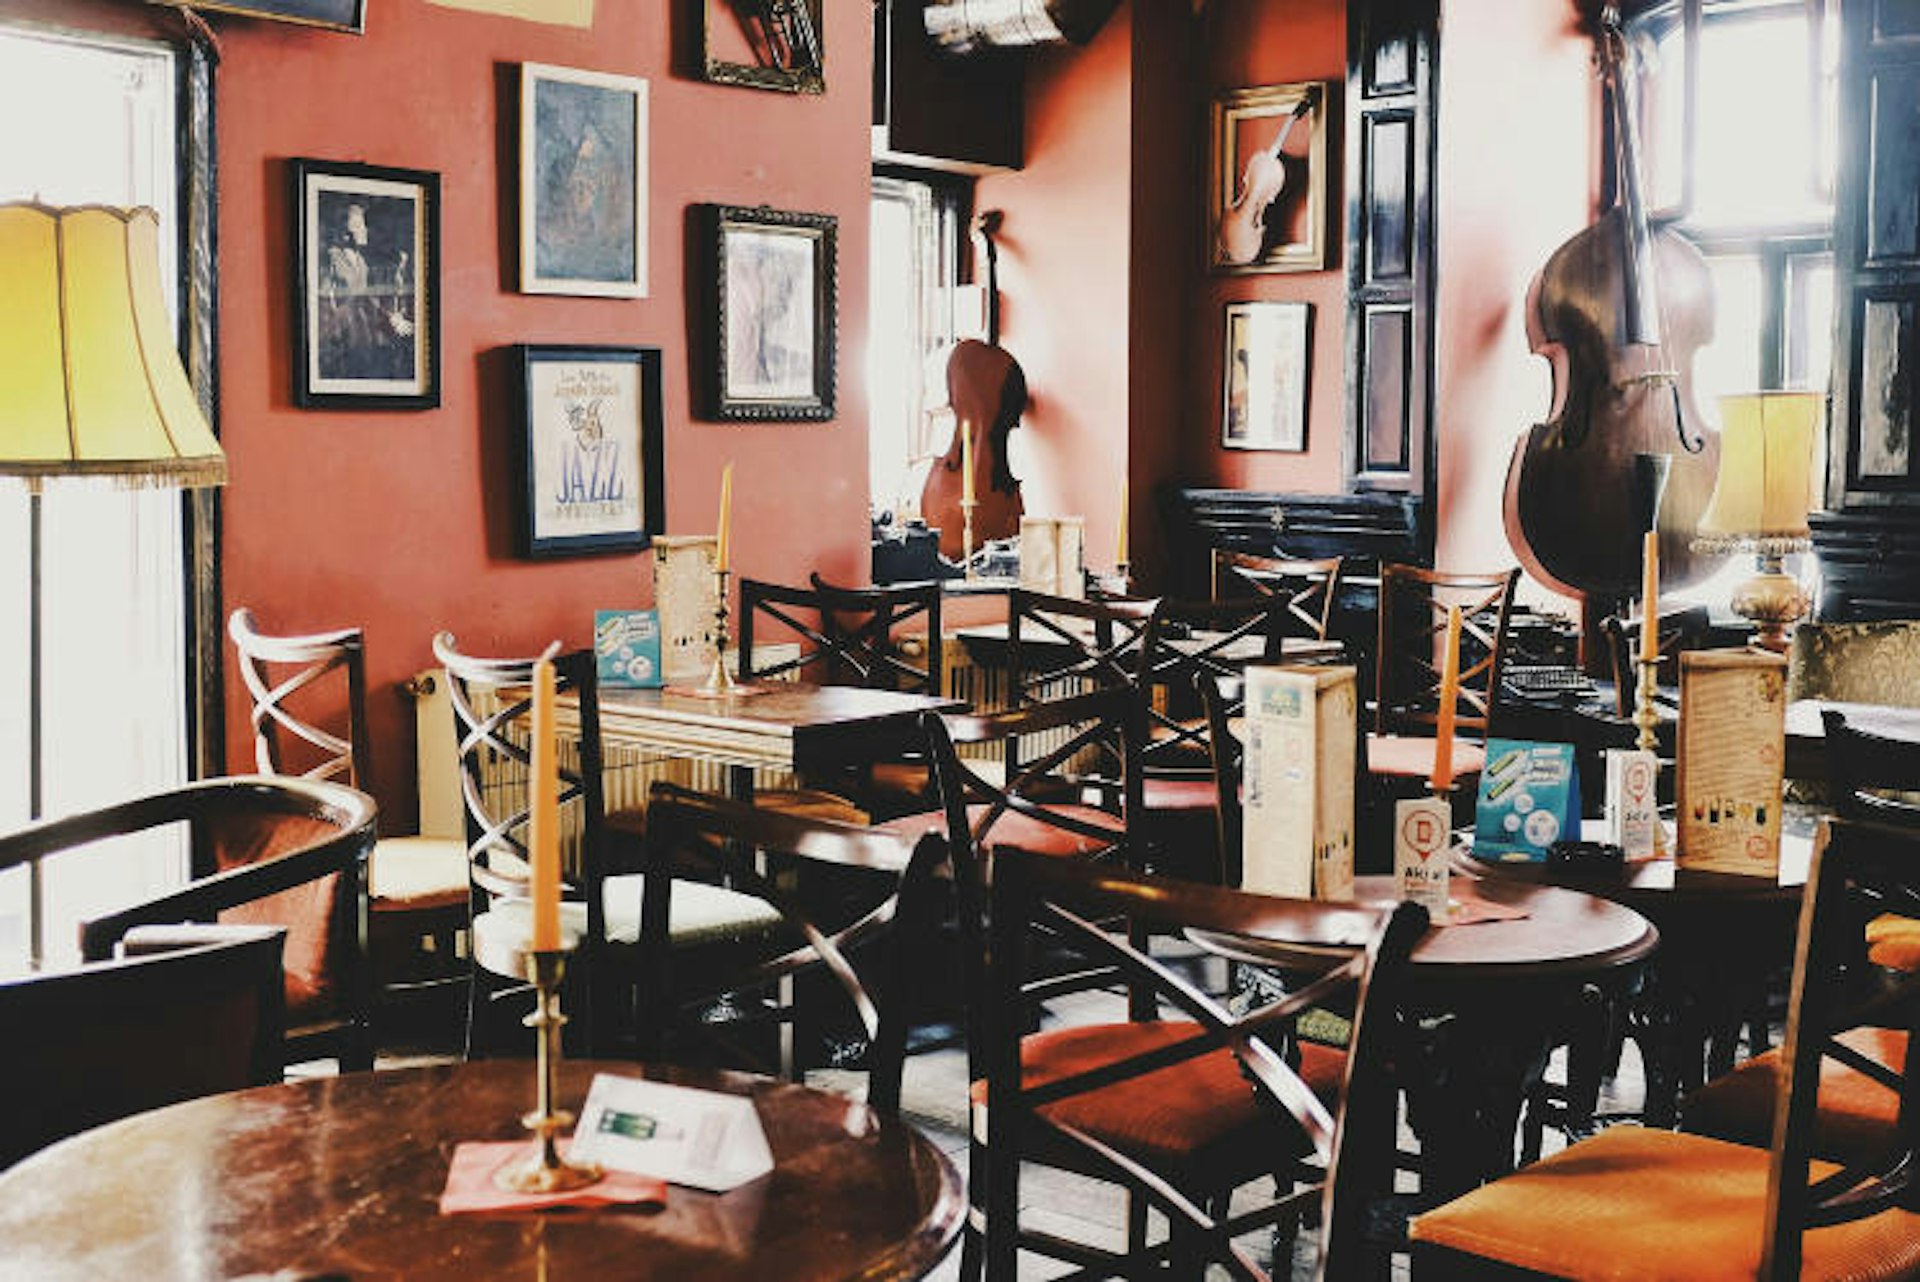 Casa Jazz is a slice of New Orleans in the heart of Cluj-Napoca. Image by Mark Baker / Lonely Planet